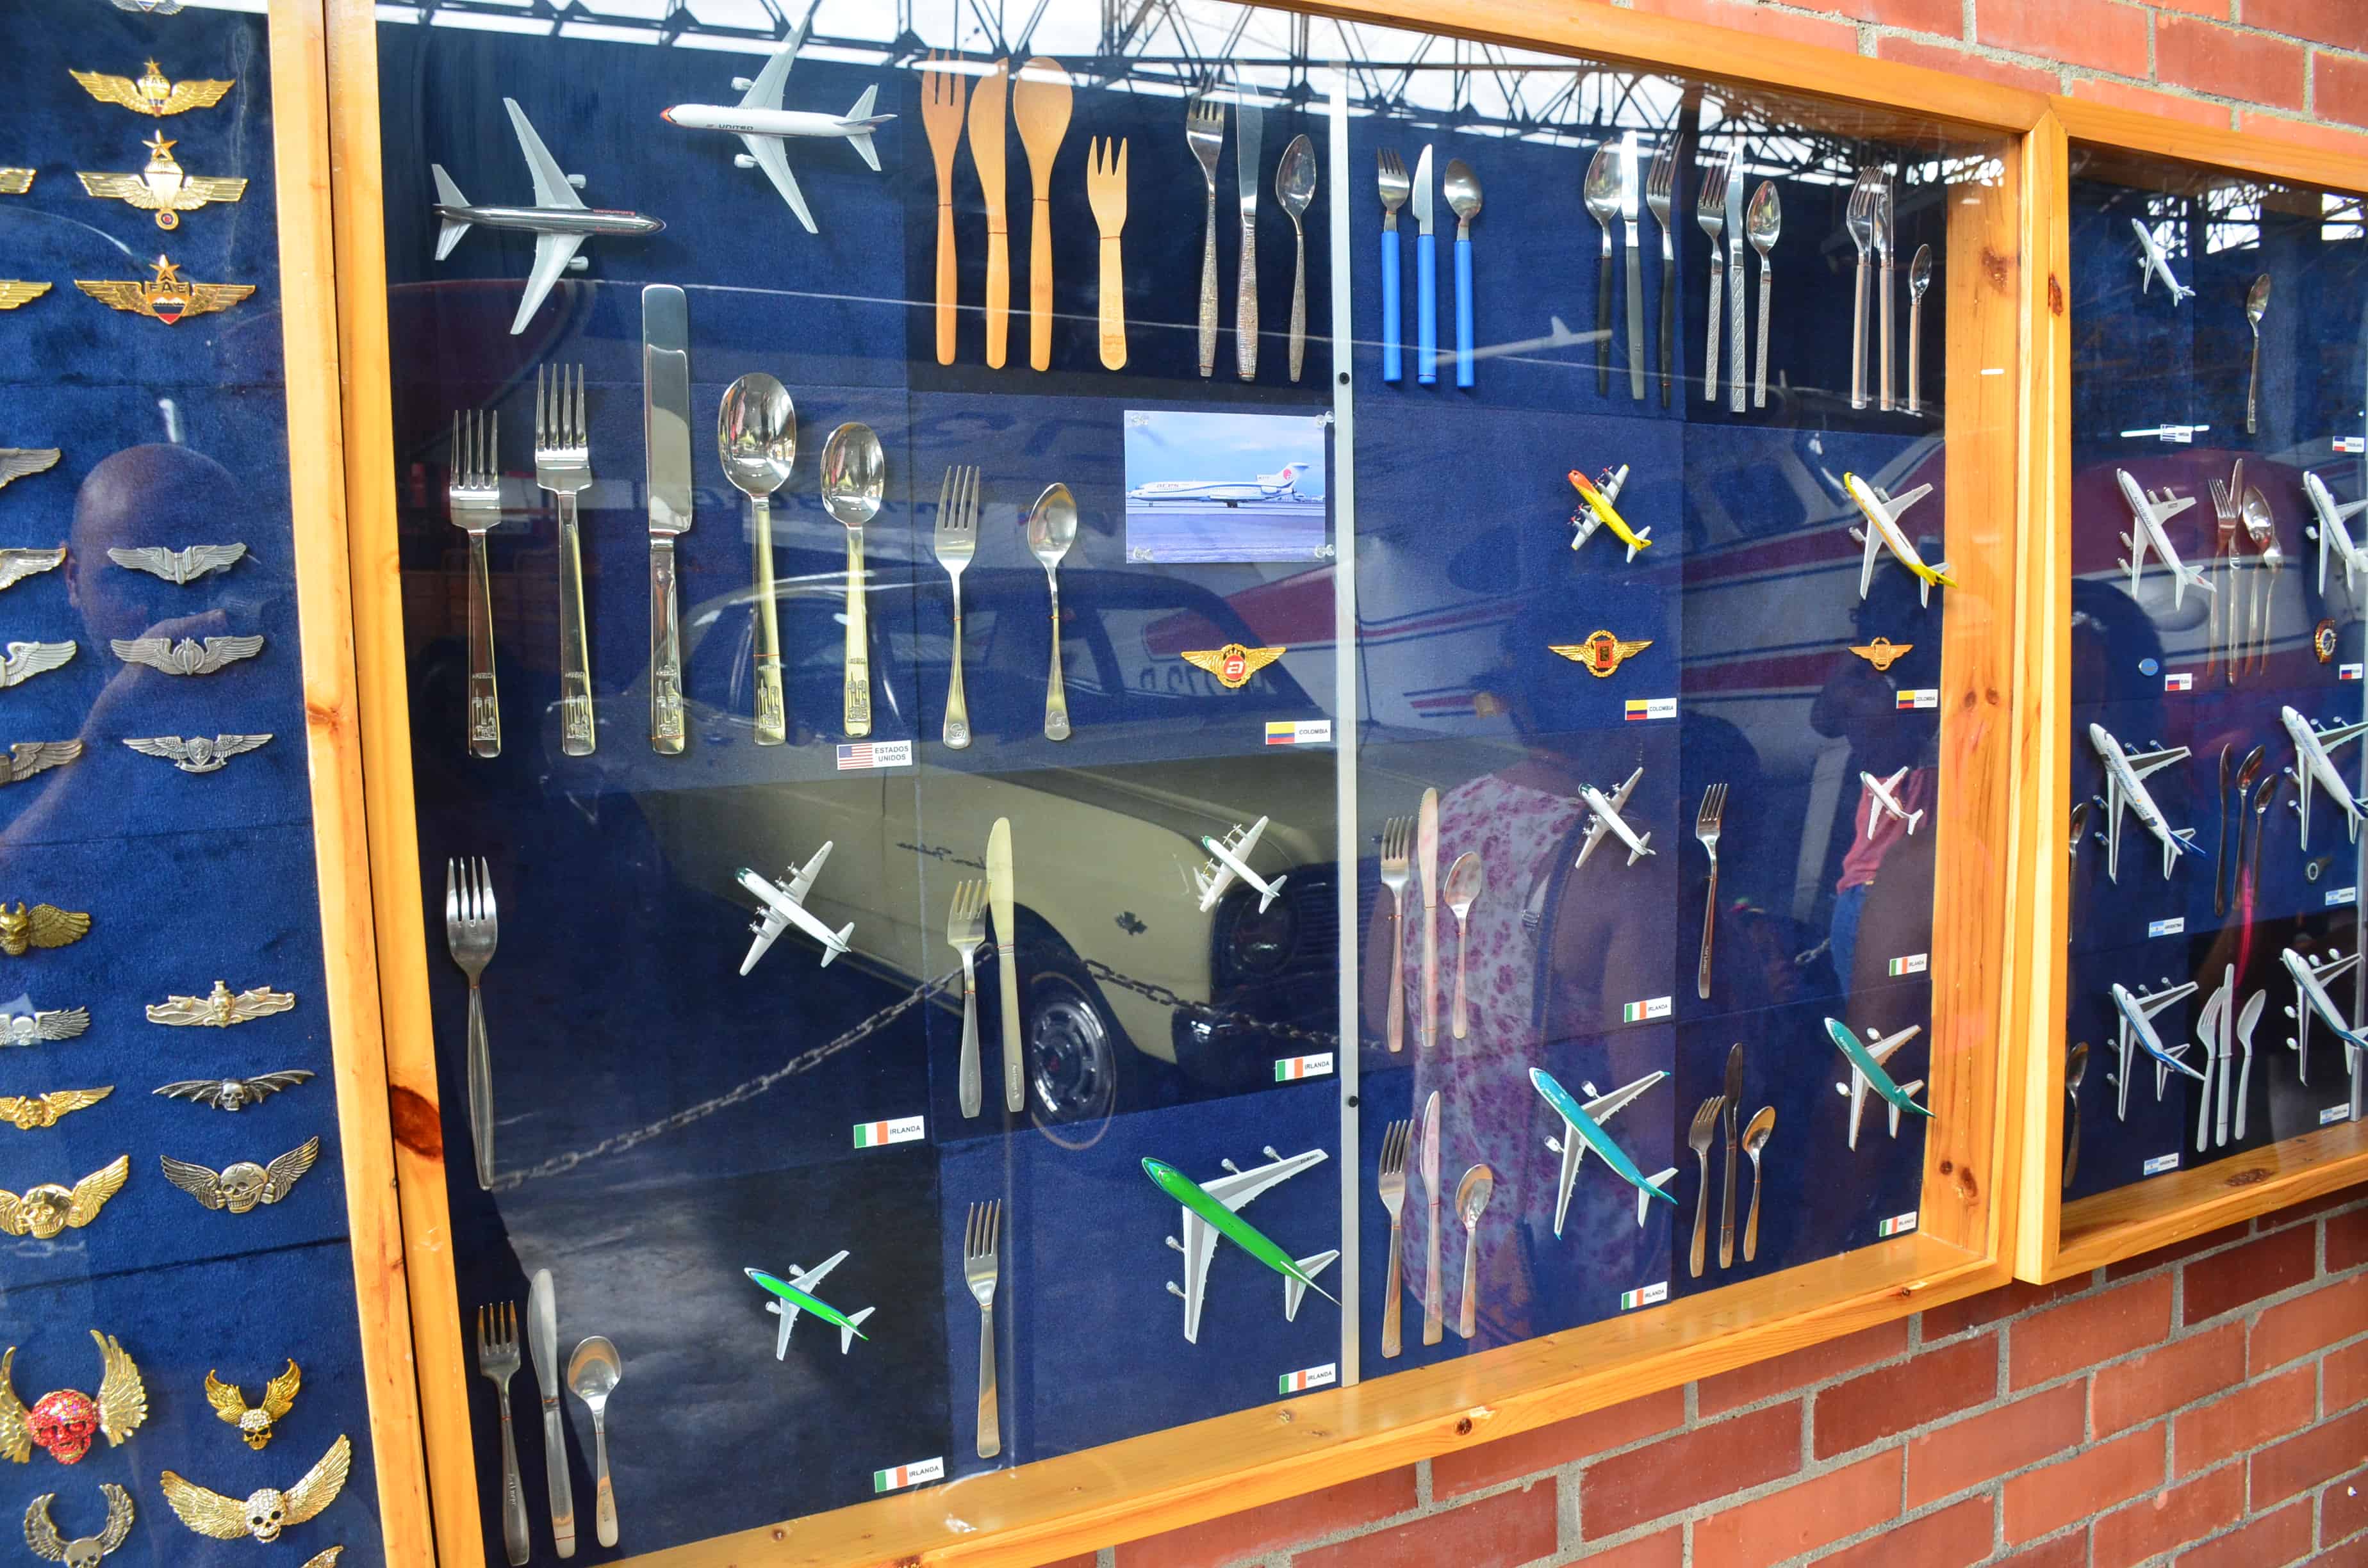 Airline cutlery at Fénix Air Museum in Palmira, Valle del Cauca, Colombia